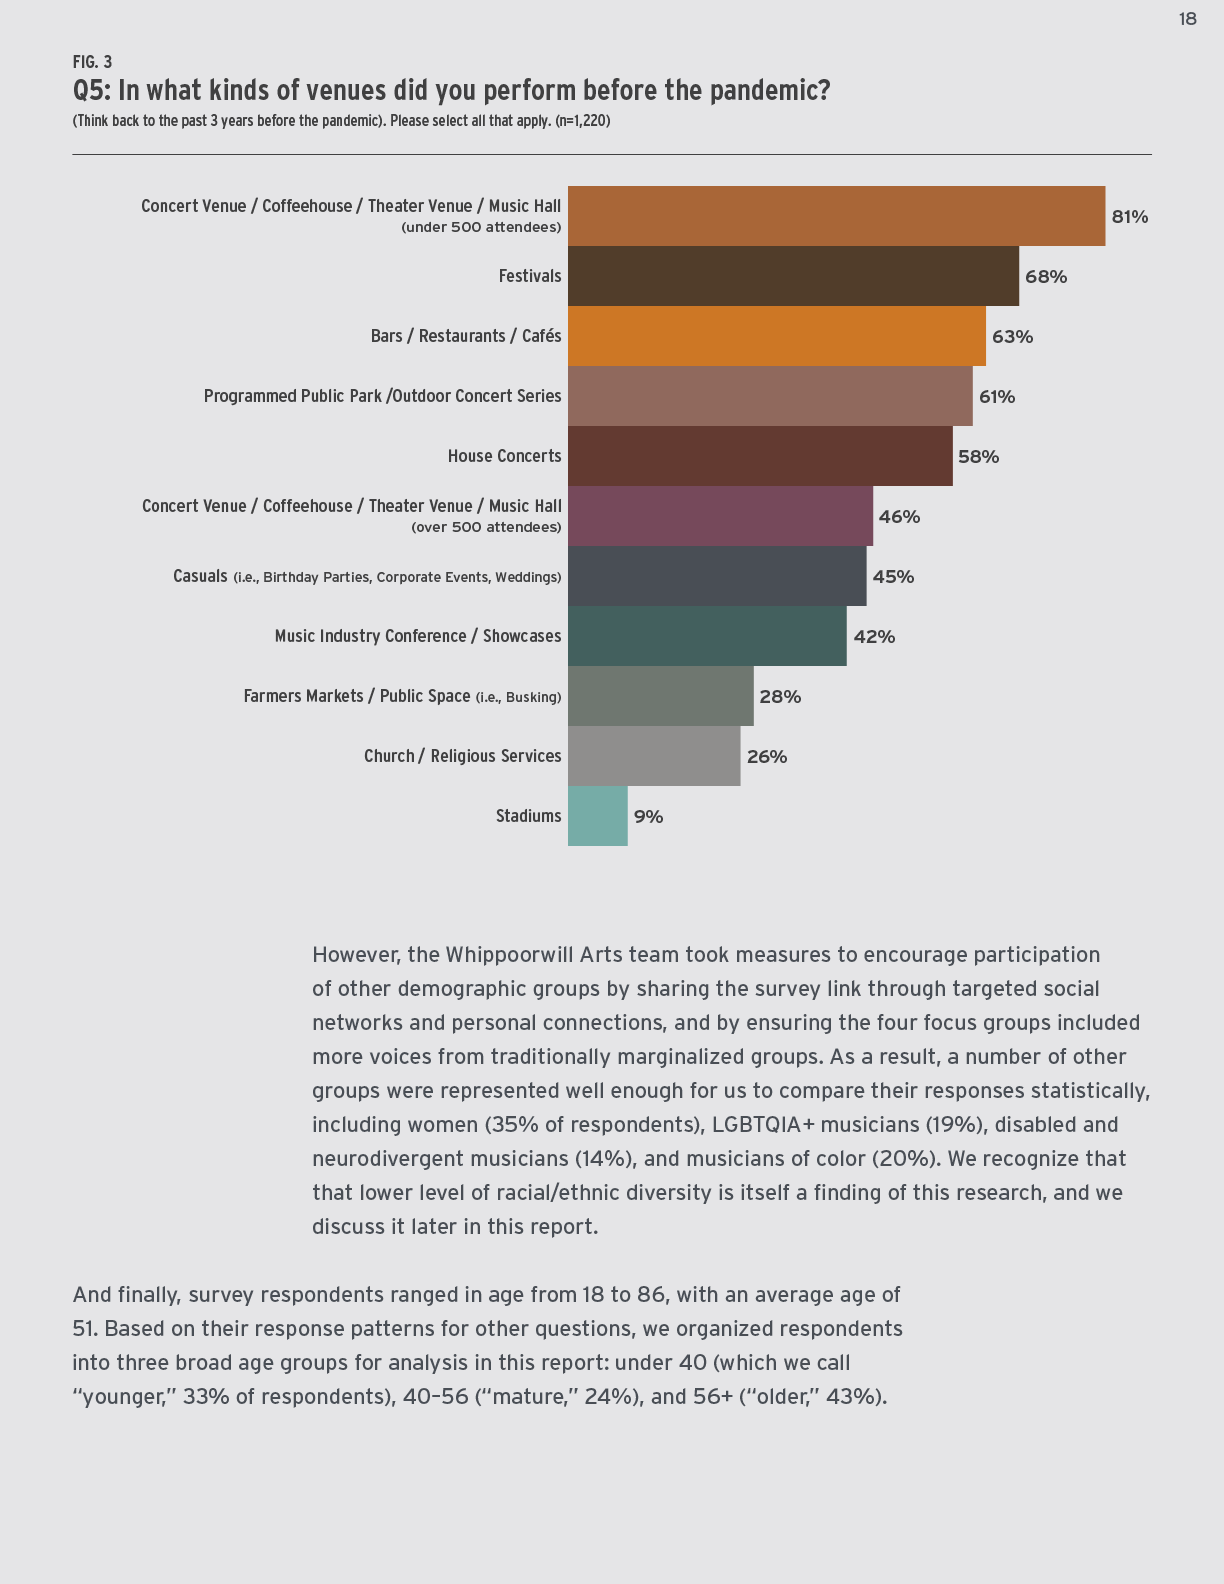 18-UPDATE Turn Up the Mic report - Findings from a 2021 national survey of roots musicians - Whippoorwill Arts and Slover Linett-18.png